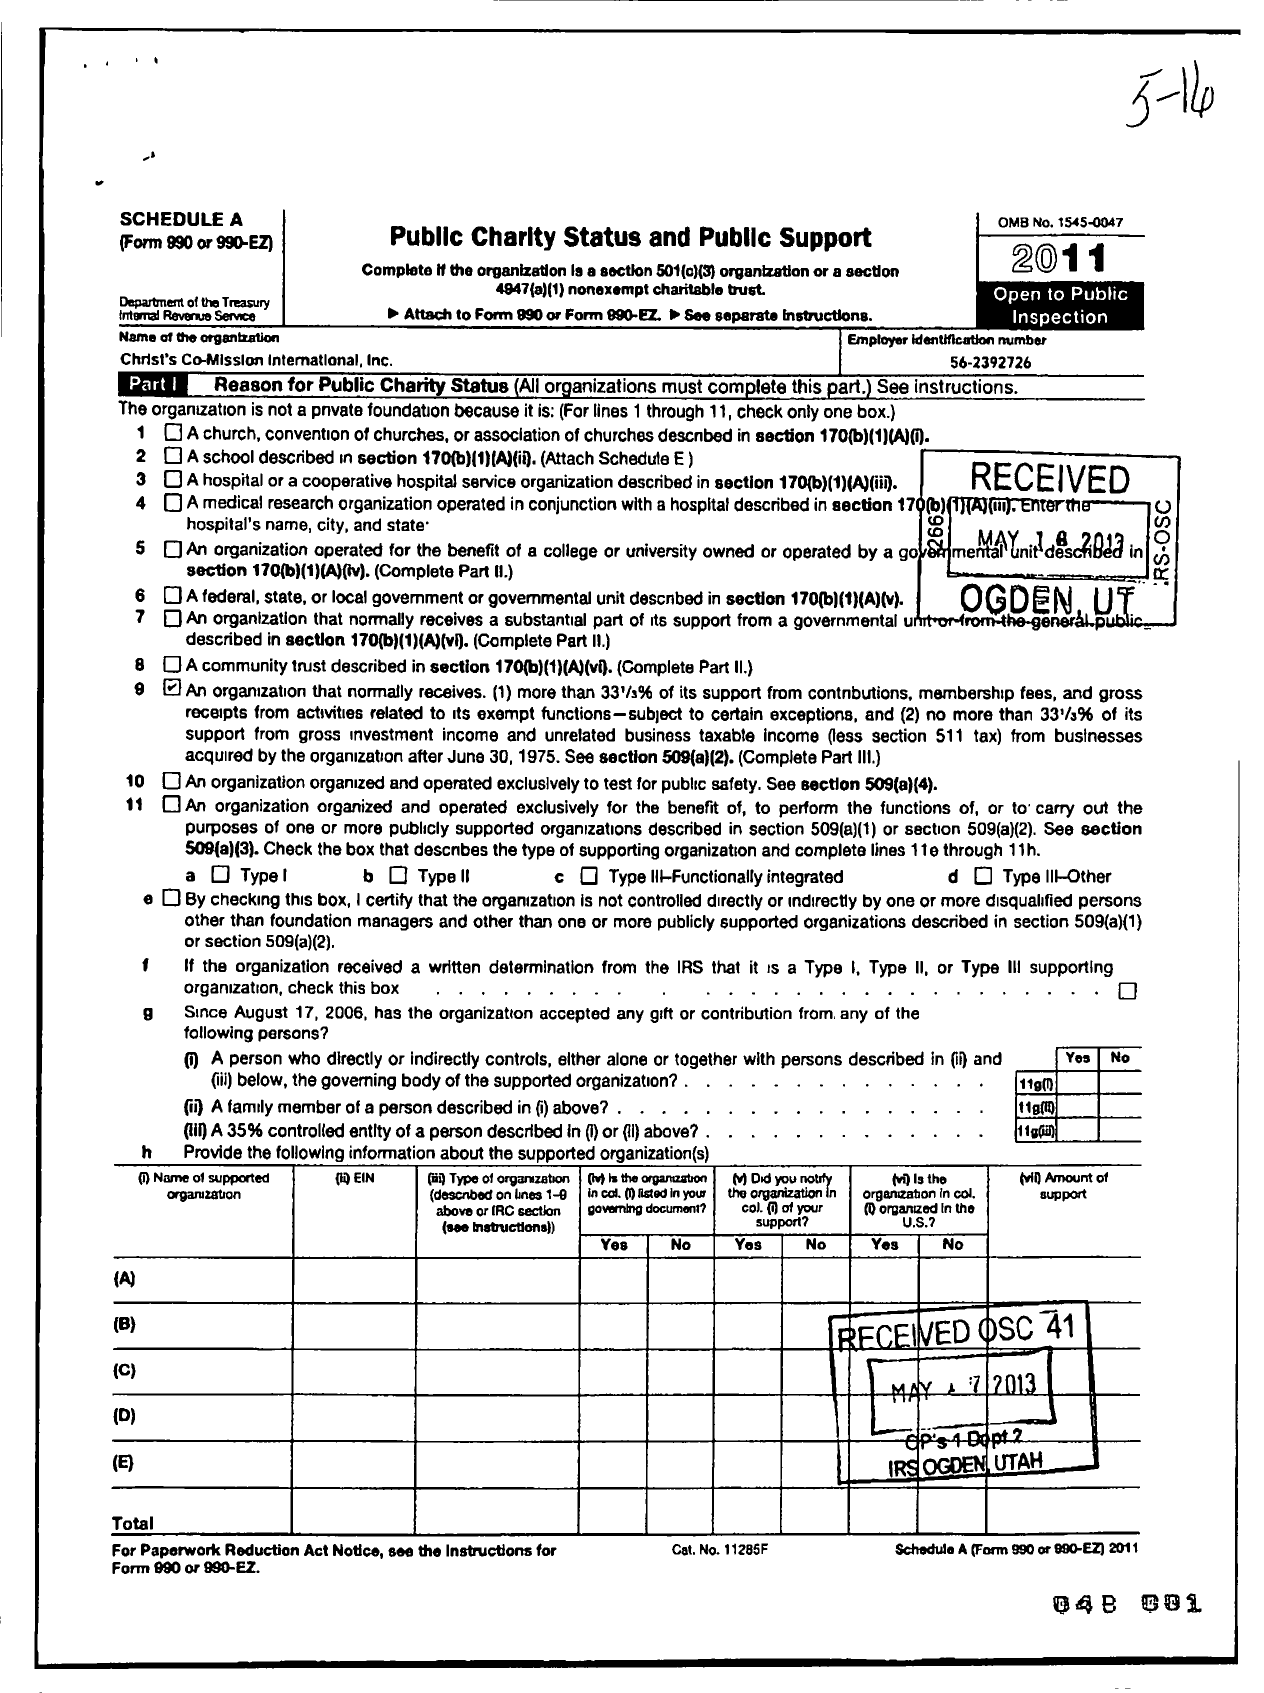 Image of first page of 2011 Form 990ER for Christs Co-Mission